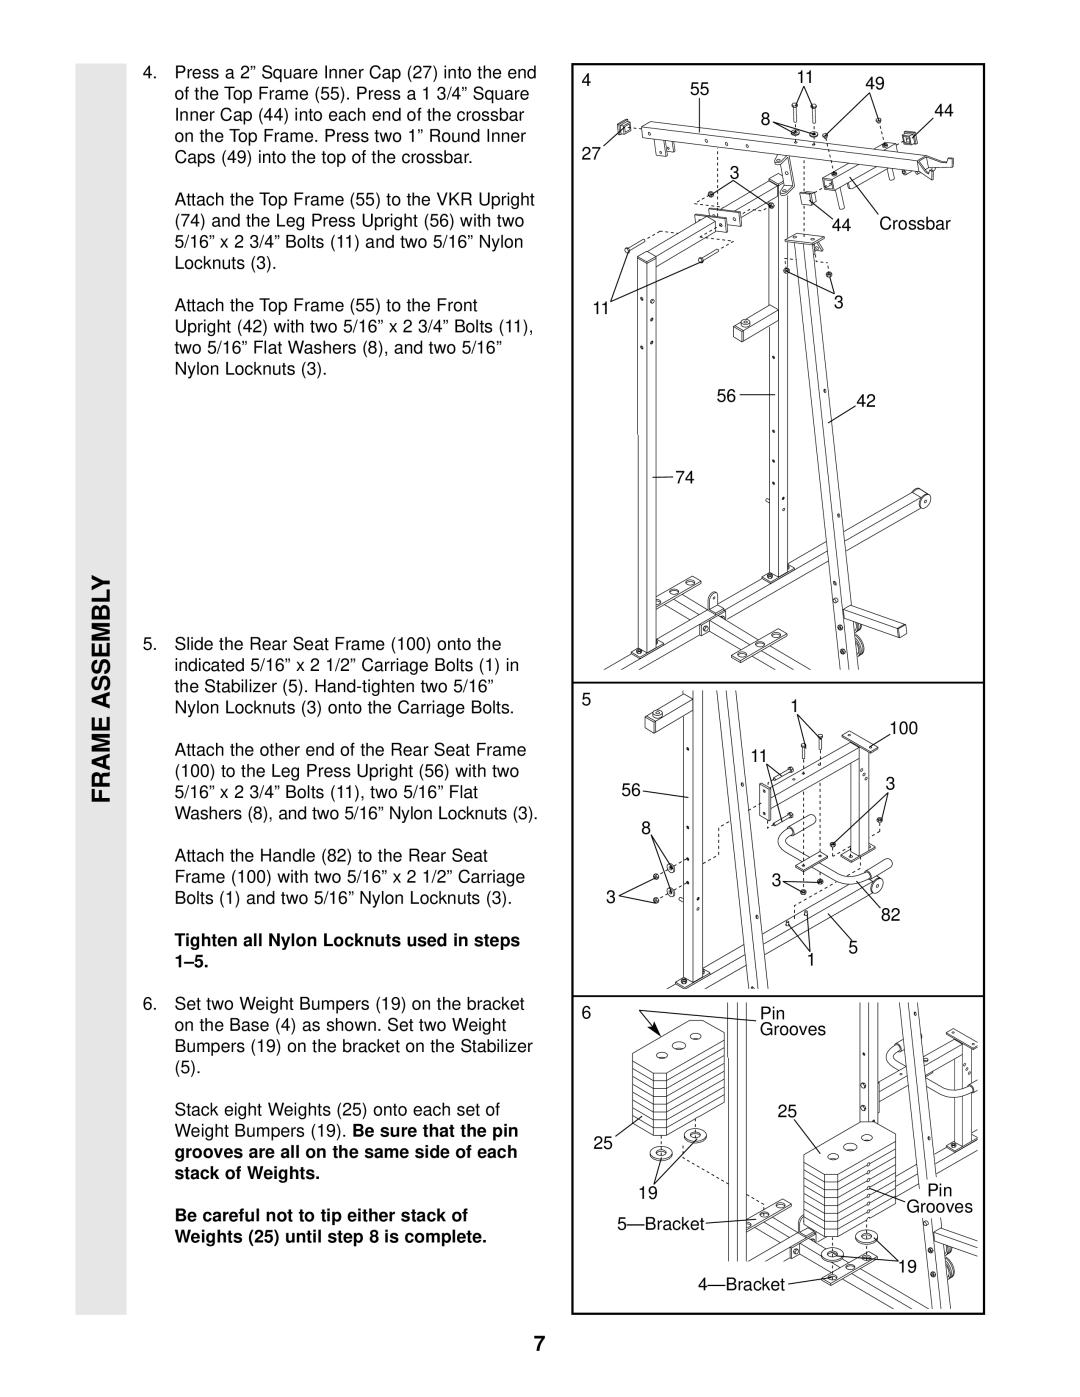 Weider WESY96400 user manual Frame Assembly, Tighten all Nylon Locknuts used in steps 